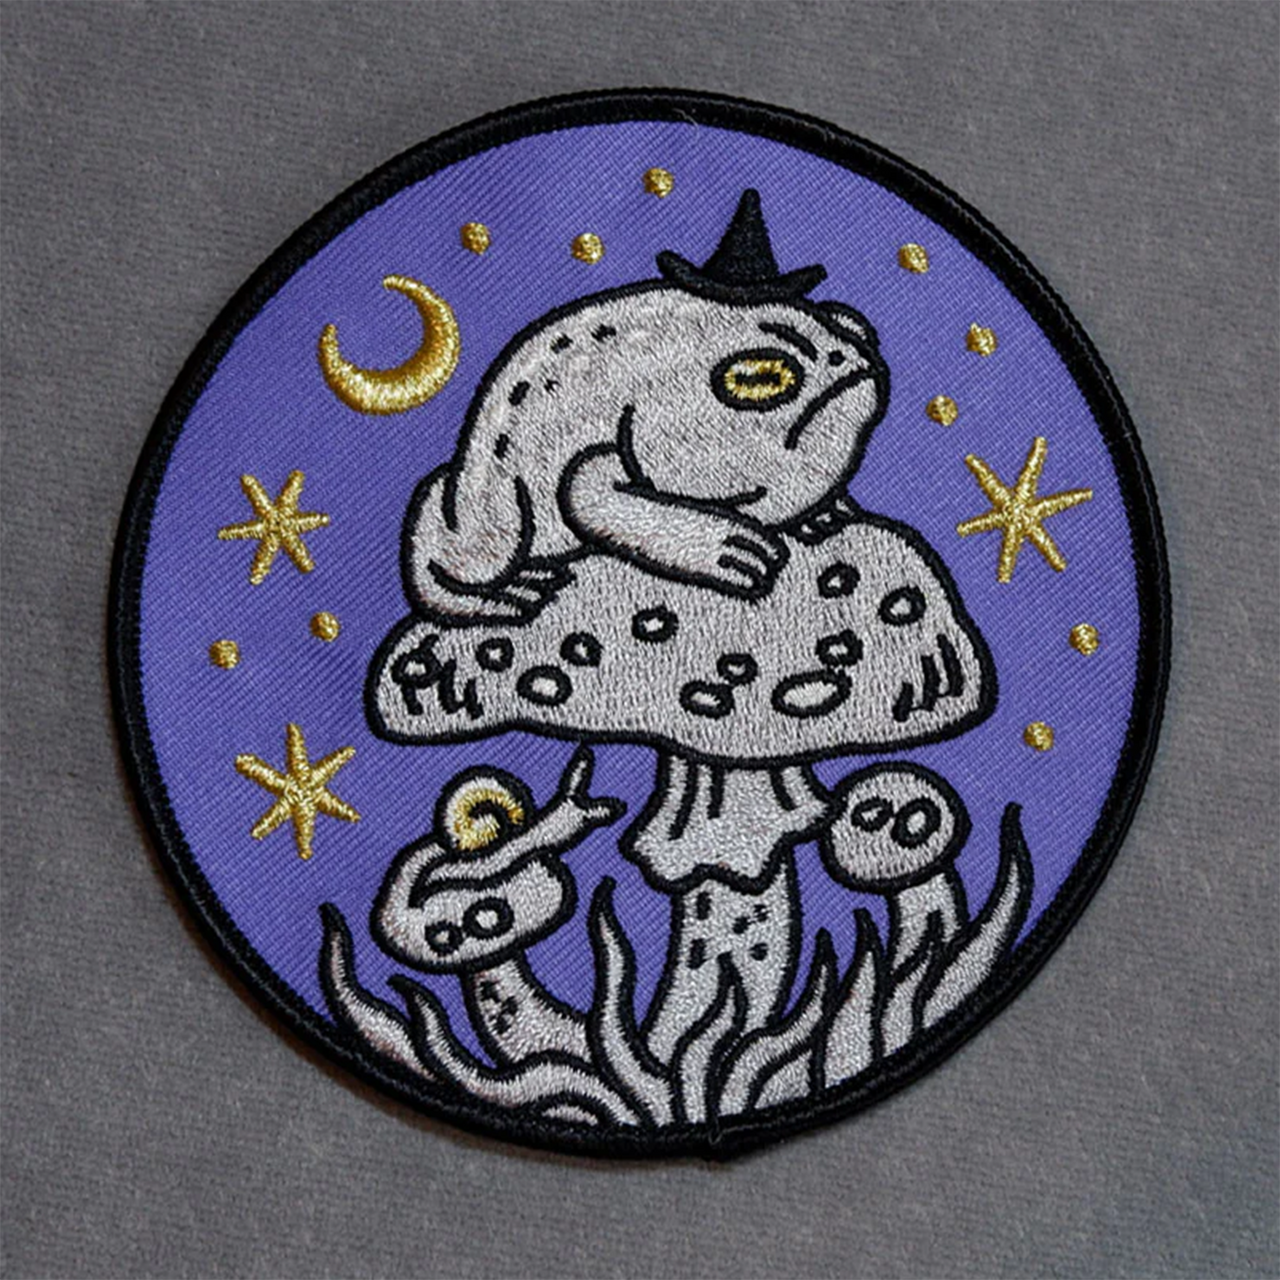 CAT COVEN GRUMPY TOAD WITCH PATCH